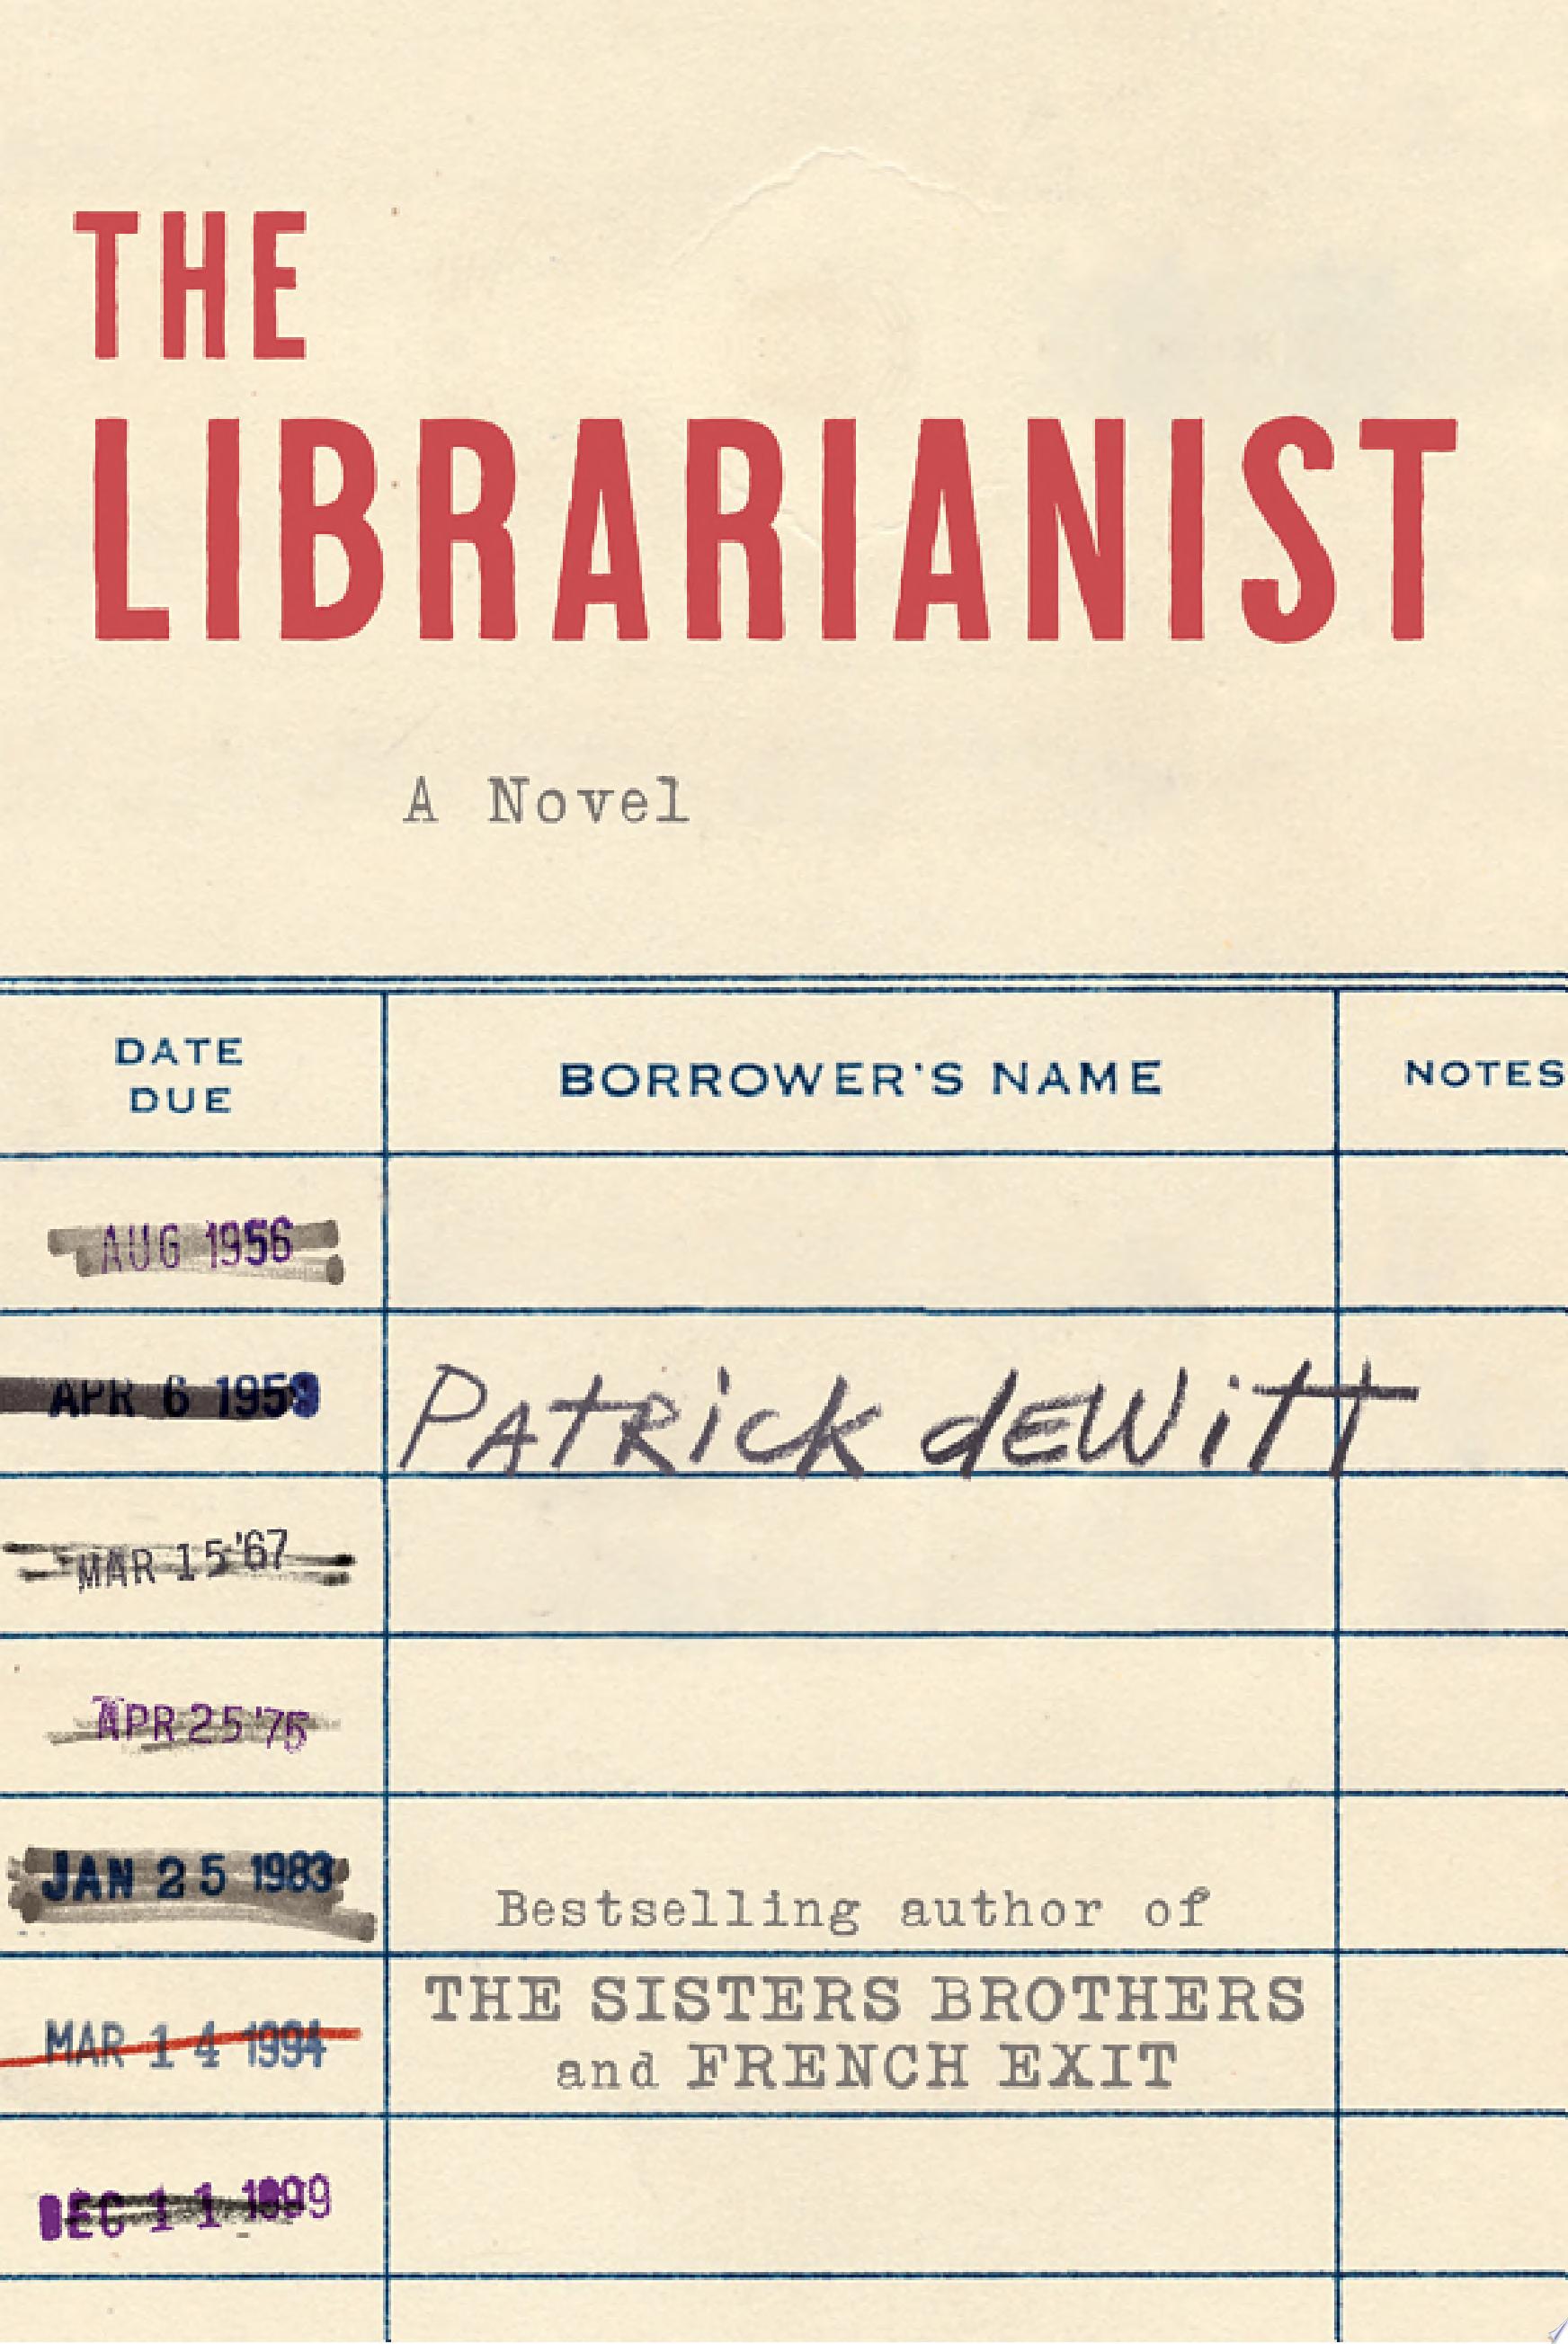 Image for "The Librarianist"